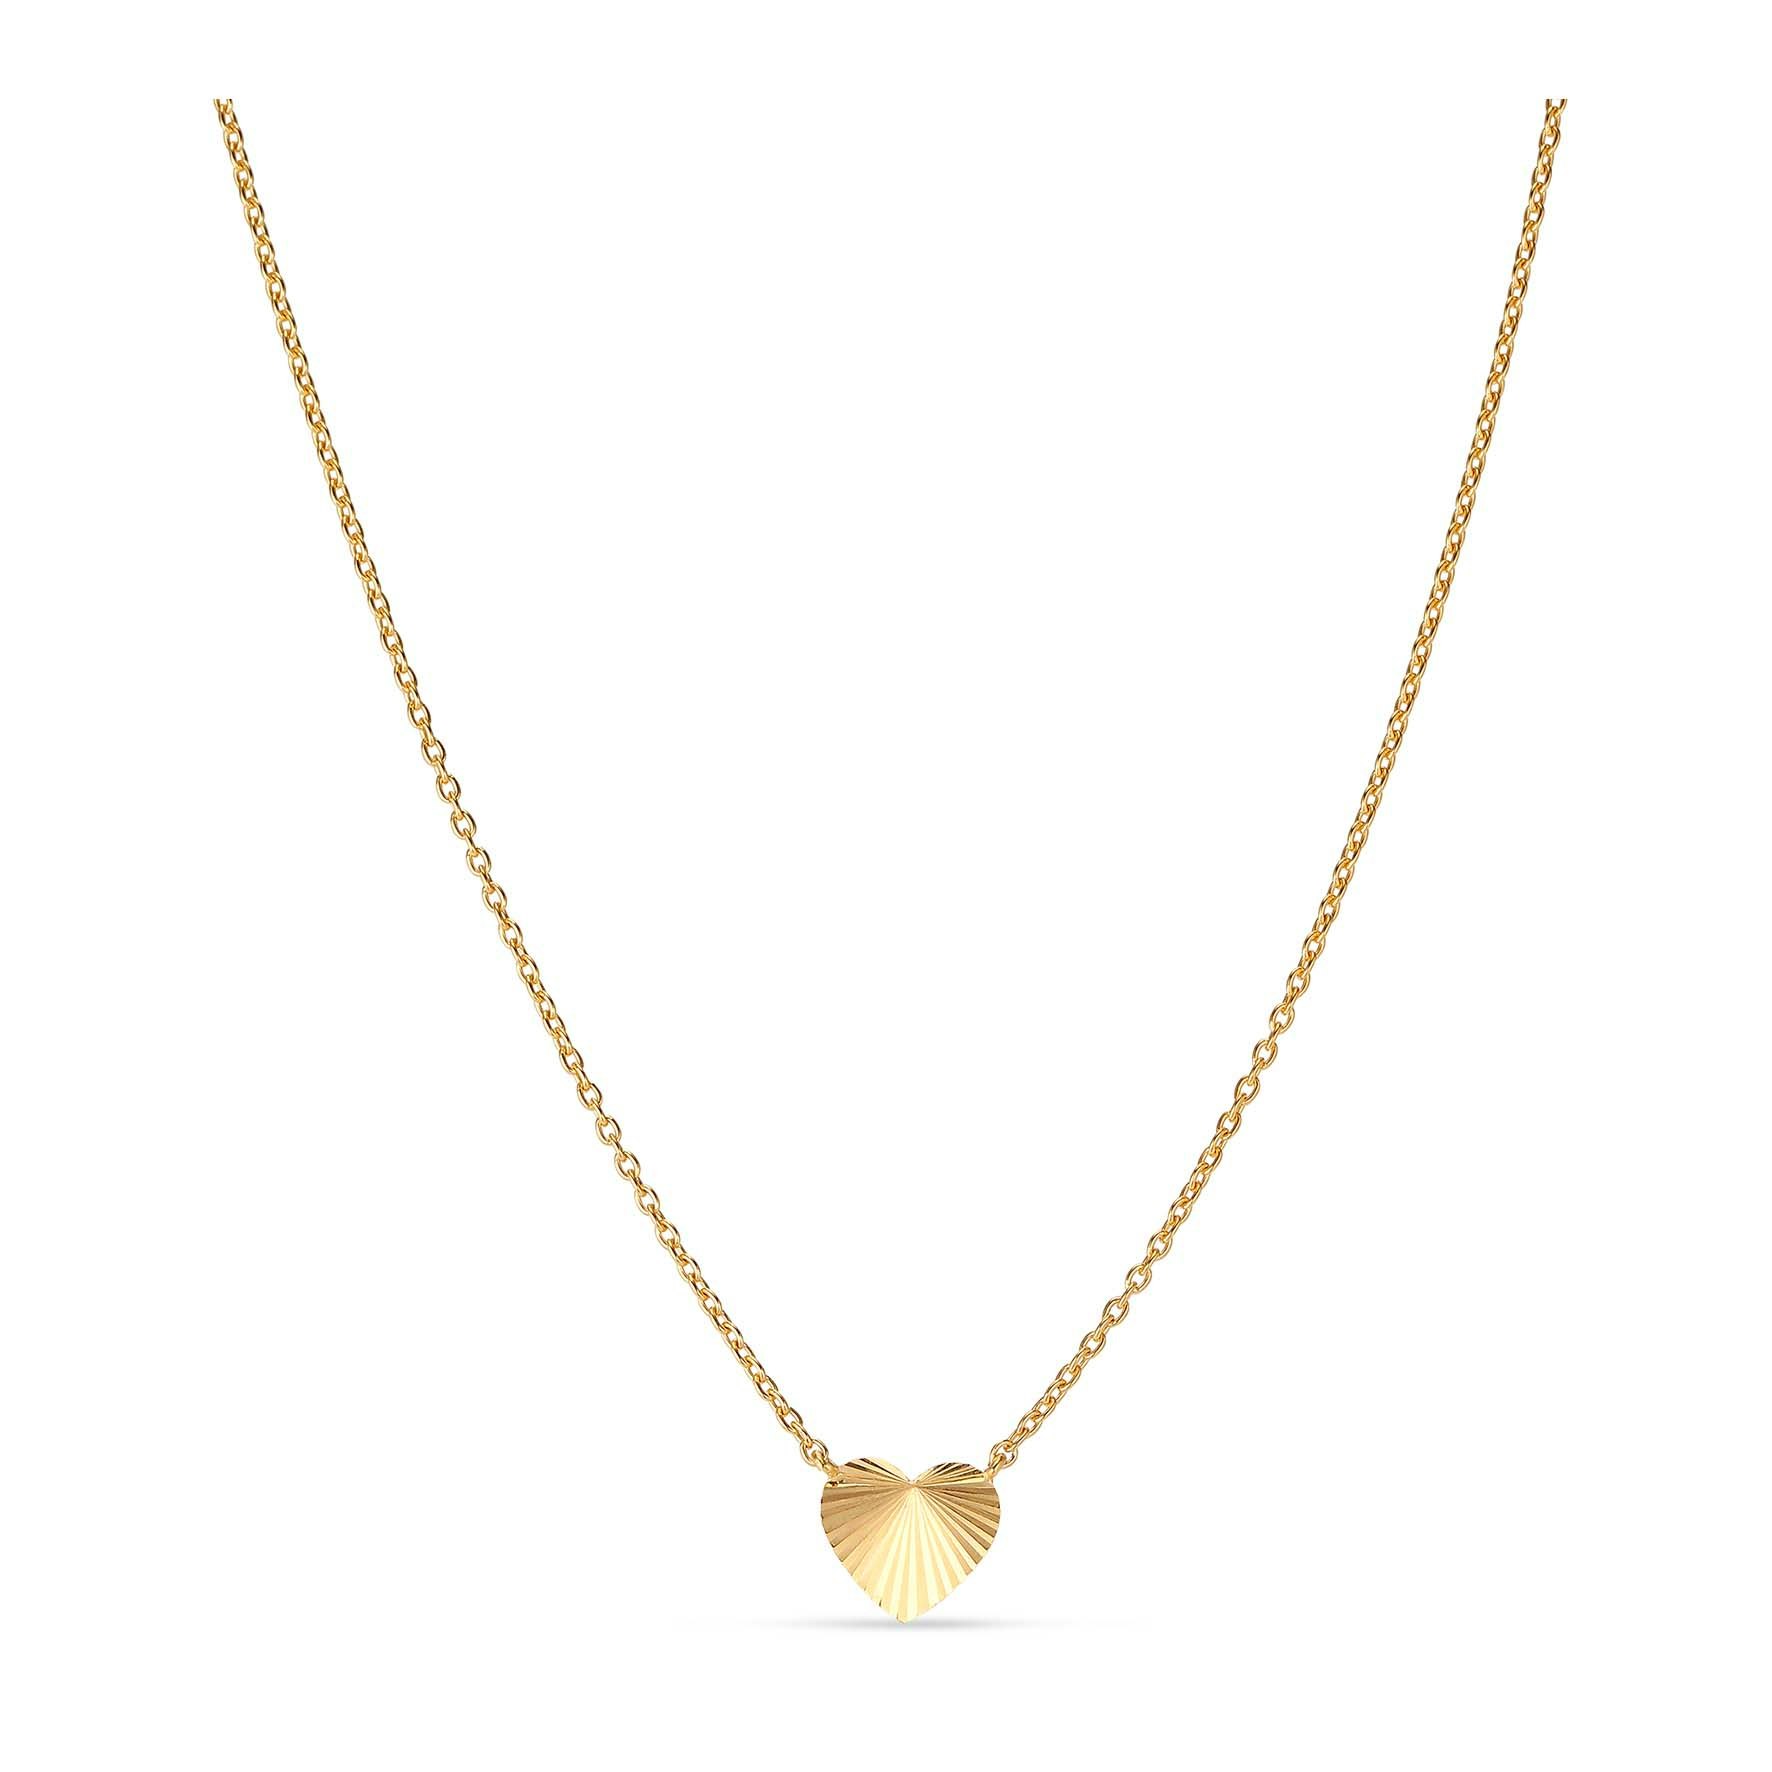 Reflection Heart Necklace from Jane Kønig in Goldplated Silver Sterling 925